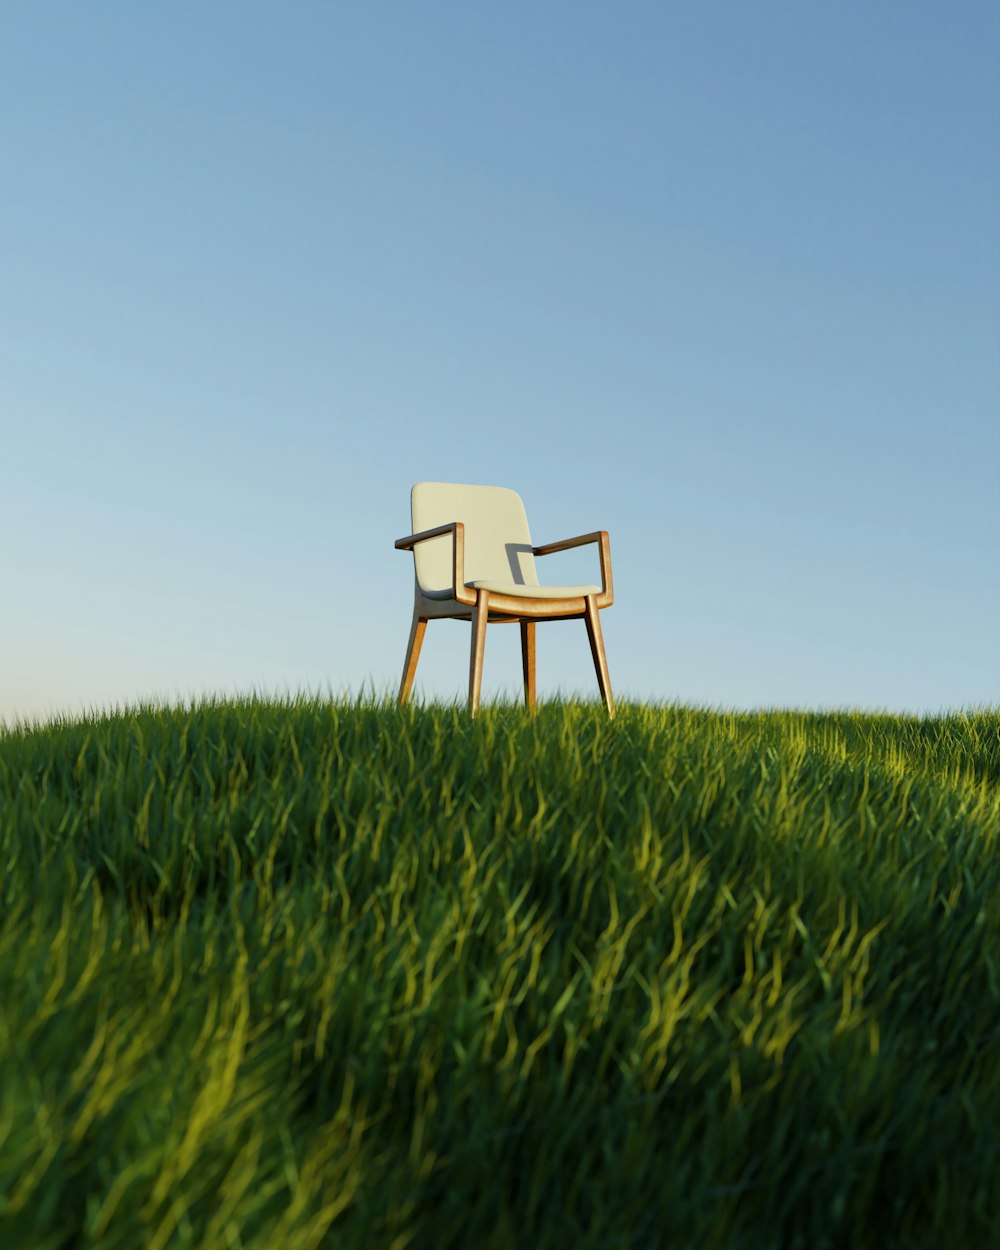 a chair in a field of grass